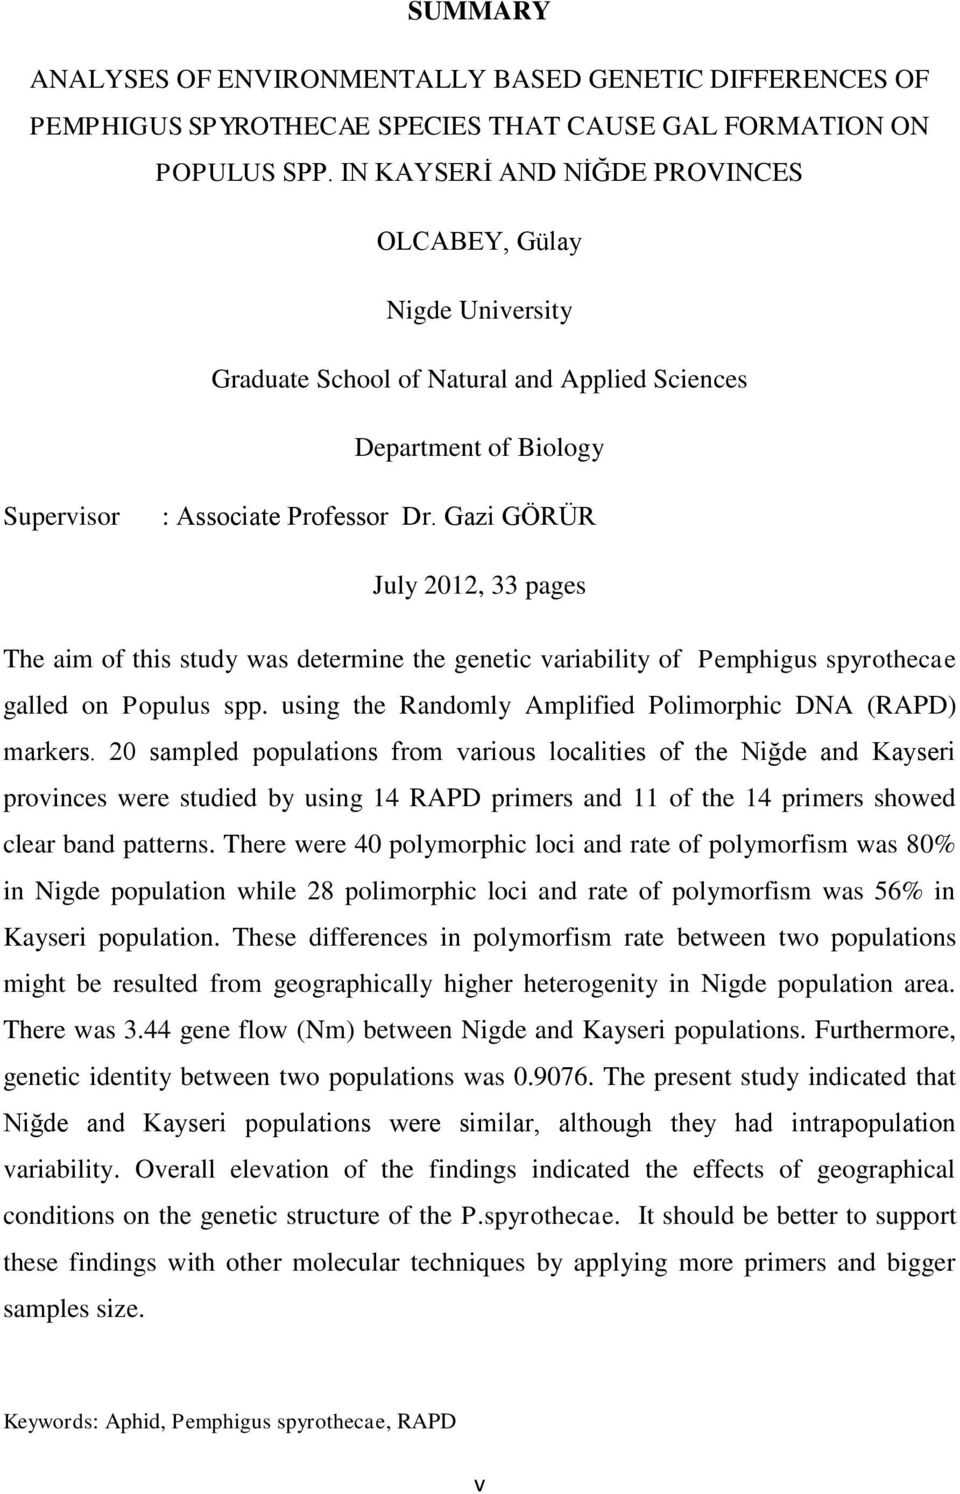 Gazi GÖRÜR July 2012, 33 pages The aim of this study was determine the genetic variability of Pemphigus spyrothecae galled on Populus spp. using the Randomly Amplified Polimorphic DNA (RAPD) markers.